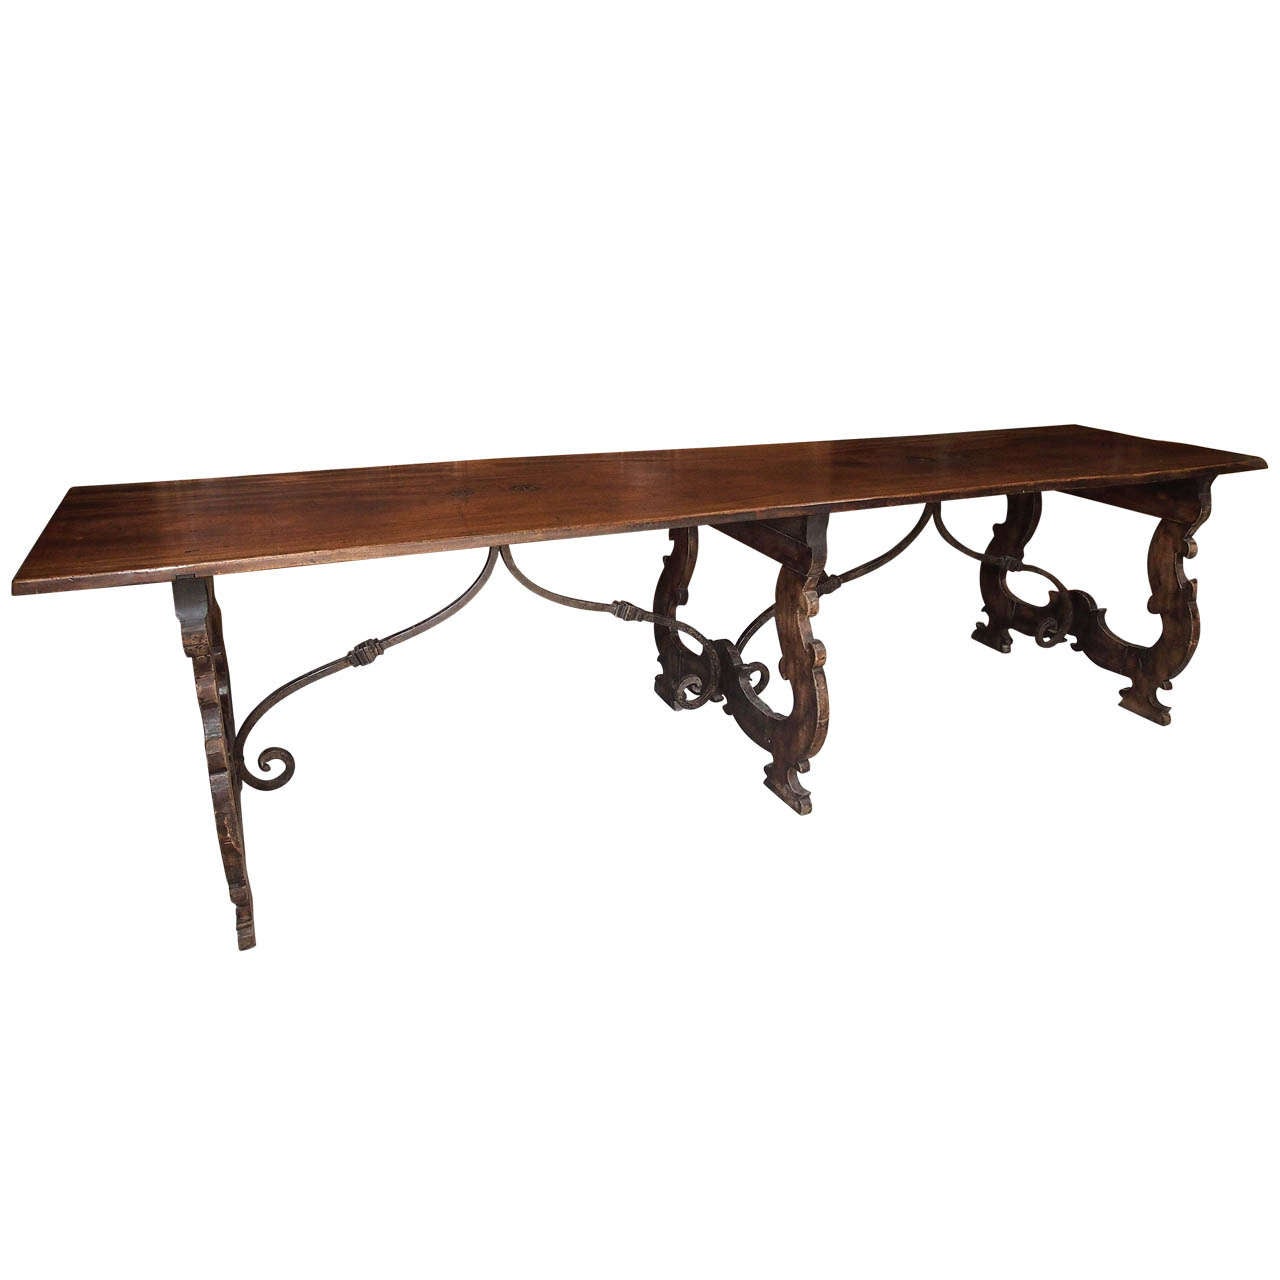 19th Century Italian Fruitwood Table with Iron Stretchers For Sale